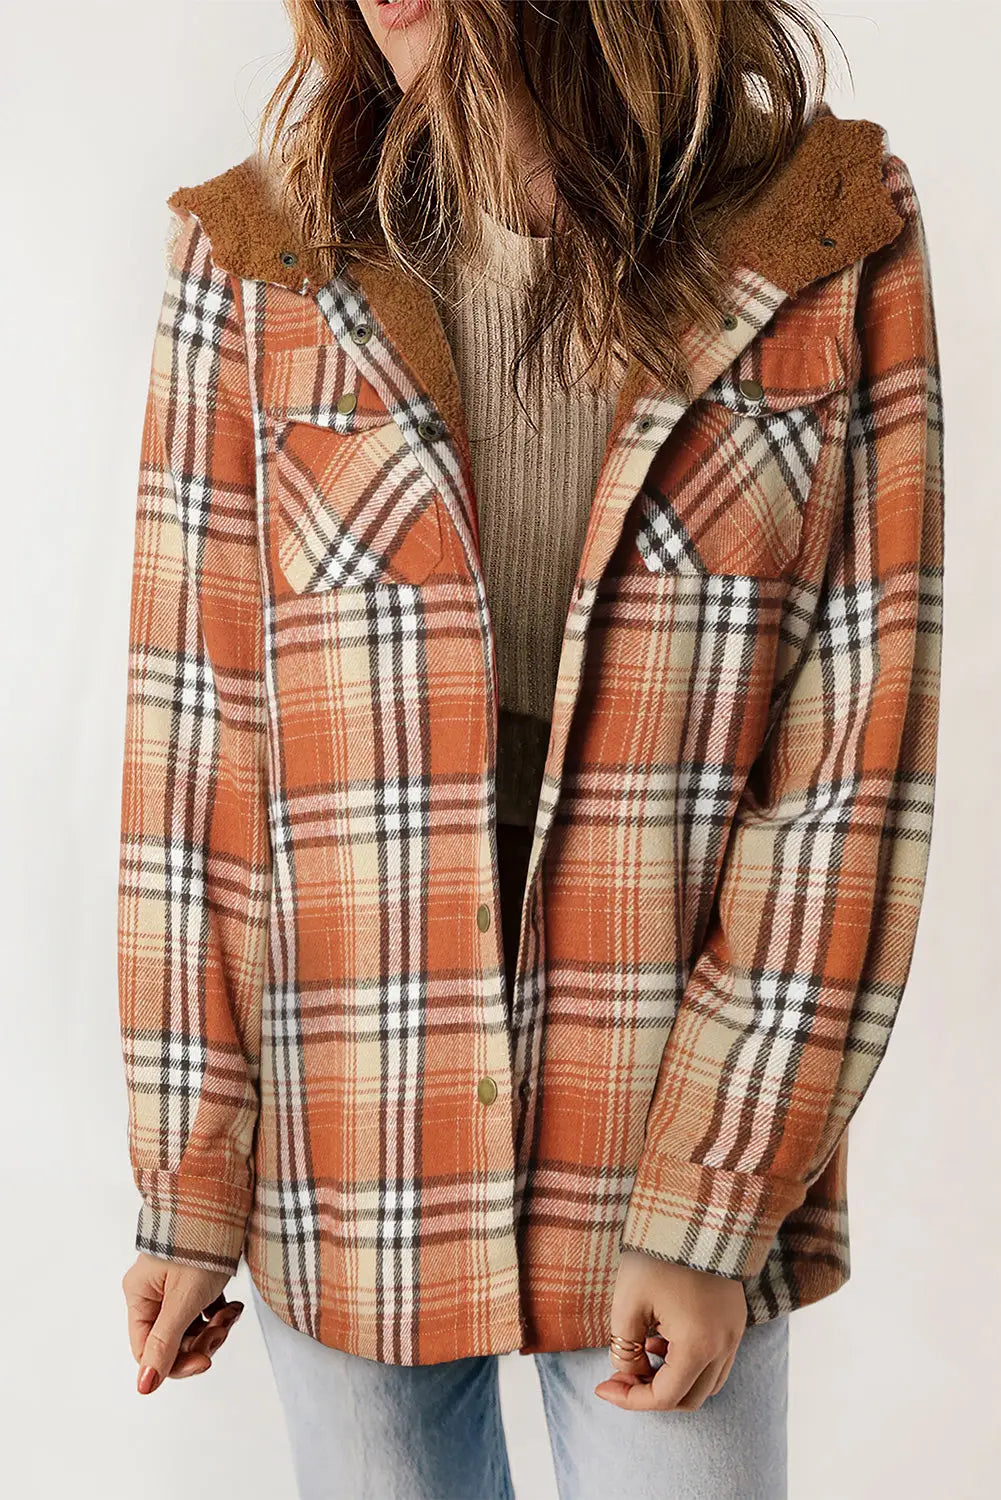 Orange plaid pattern sherpa lined hooded shacket - 2xl / 100% polyester - shackets